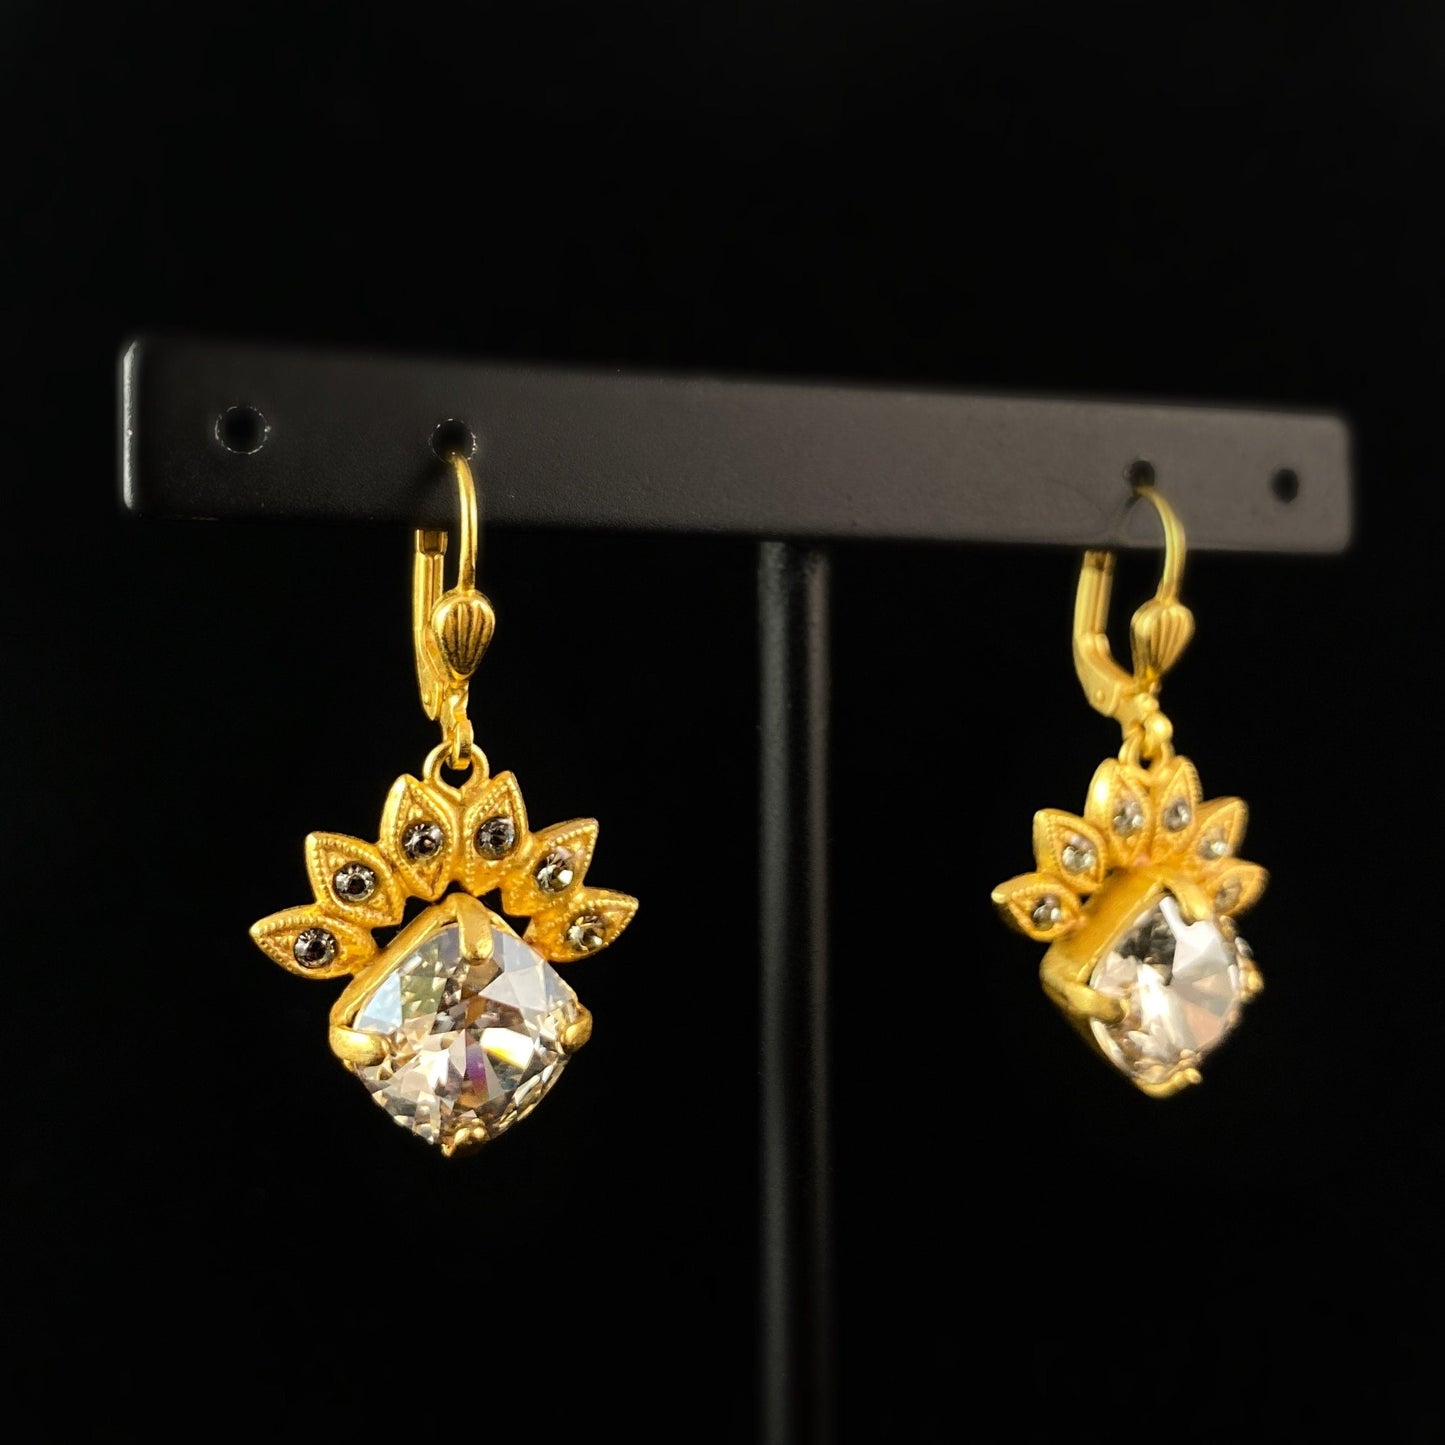 White Triangle Swarovski Crystal Drop Earrings with Floral Crown Detailing- La Vie Parisienne by Catherine Popesco